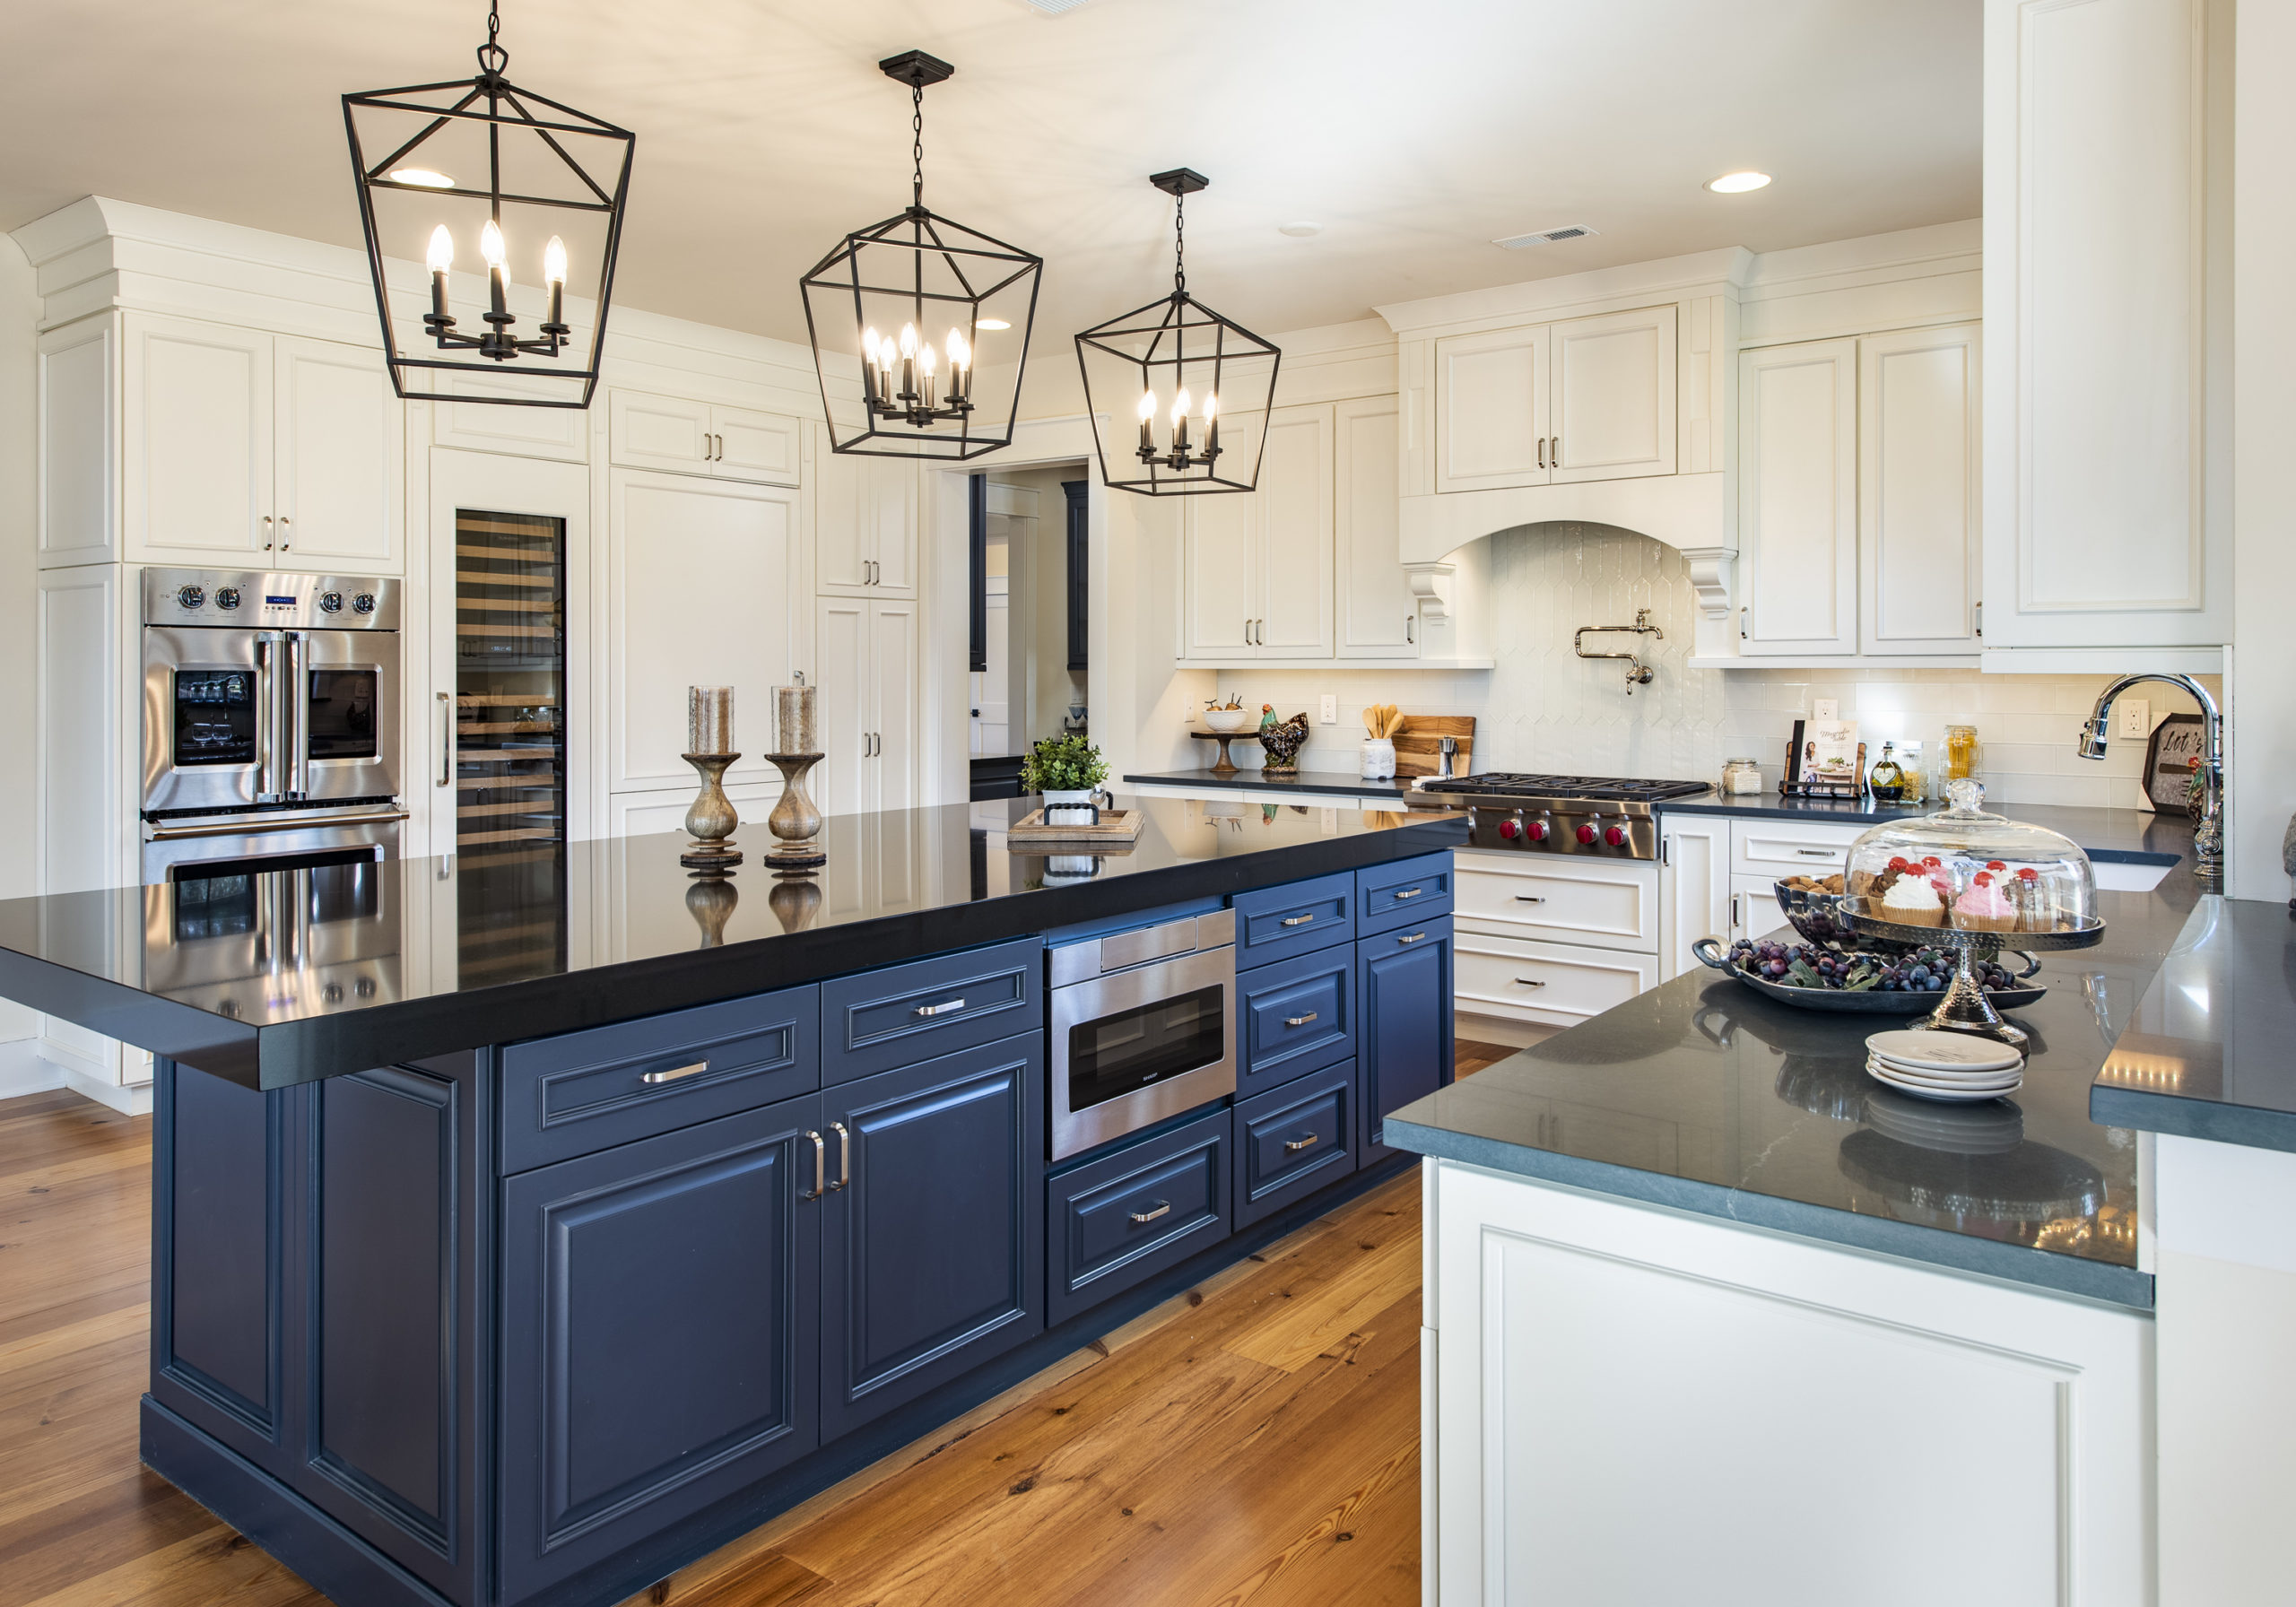 Home Kitchen Trends 2021 : 39 Kitchen Trends 2021 New Cabinet And Color